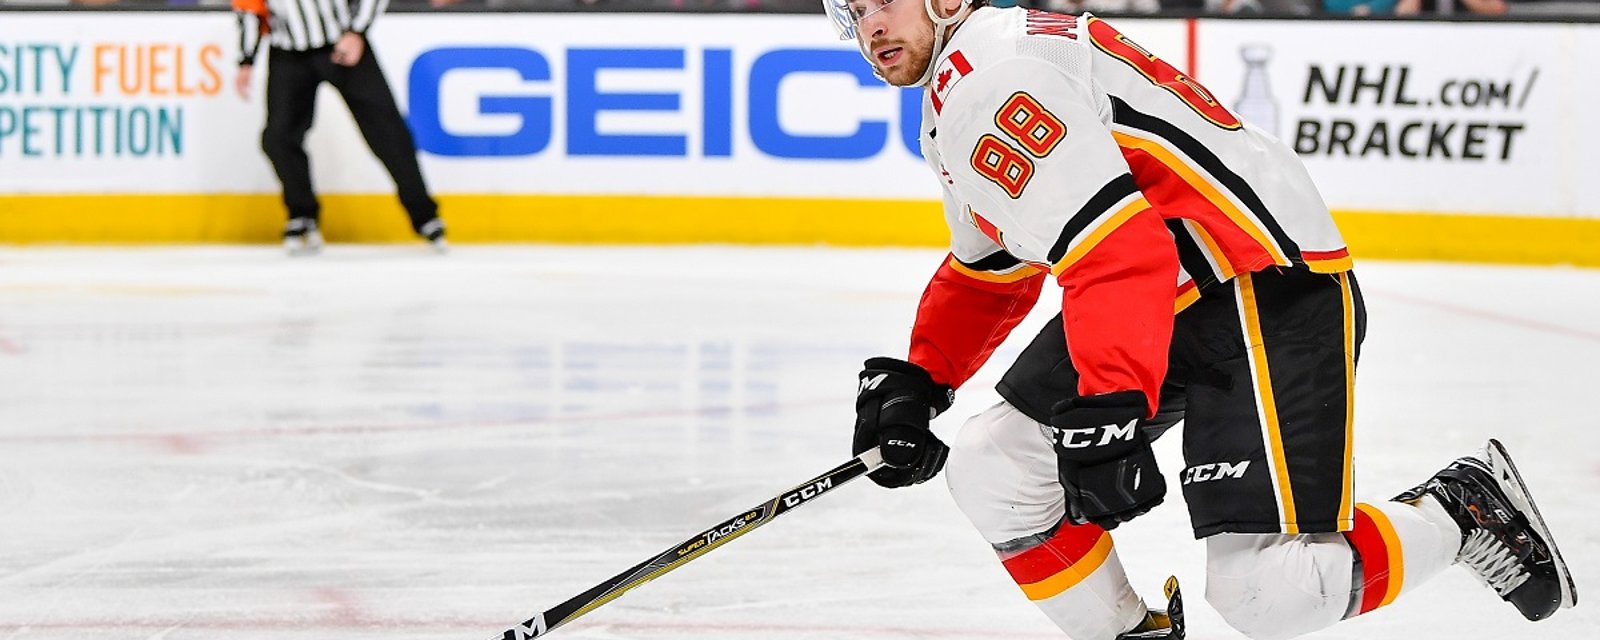 Andrew Mangiapane agrees to a brand new deal with the Flames.